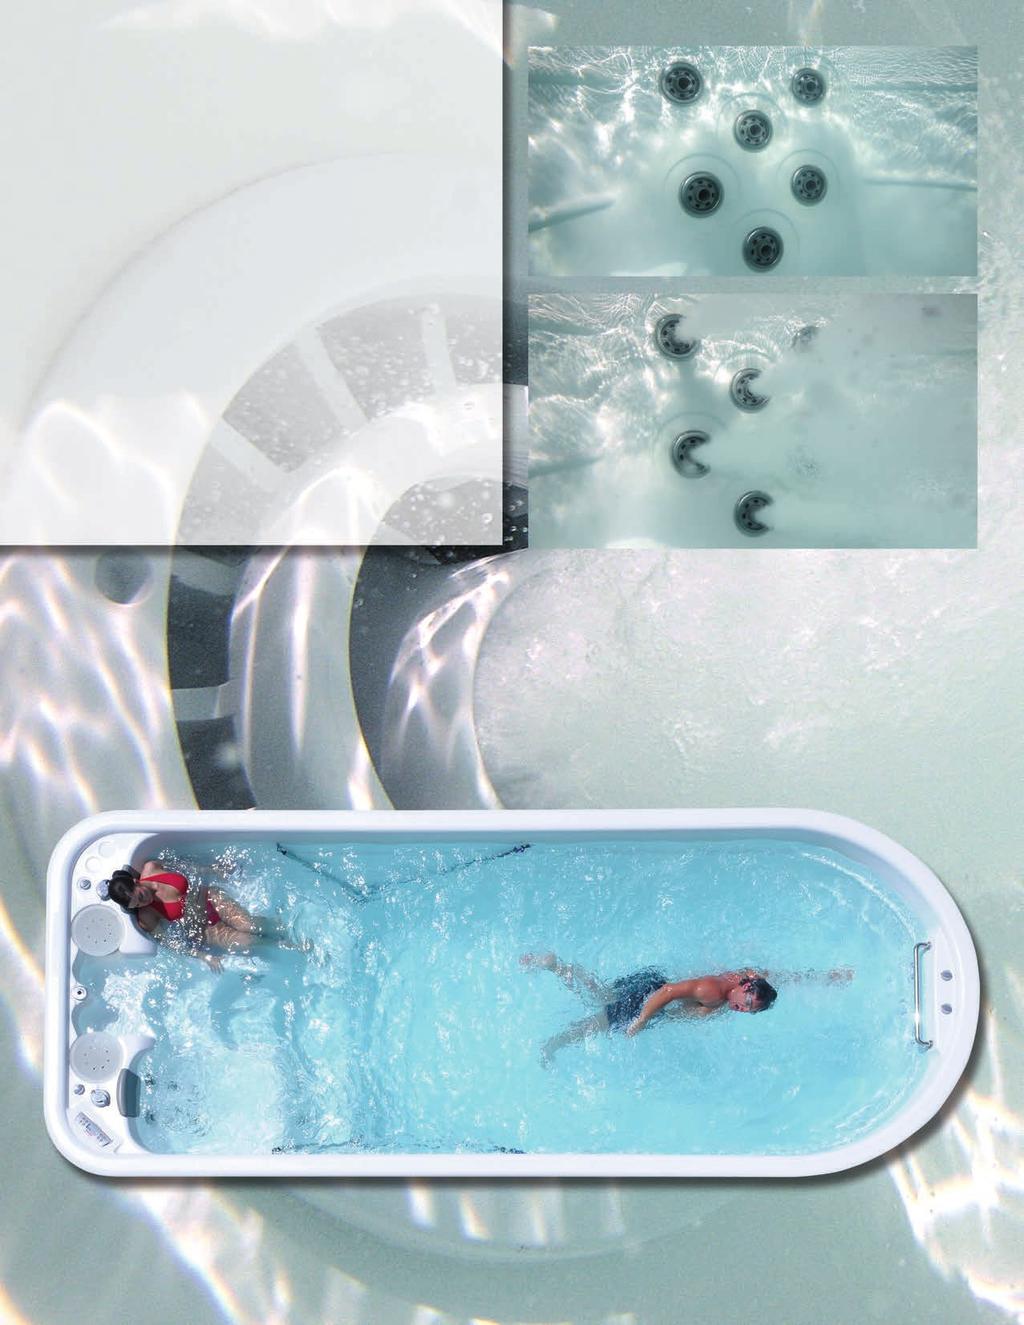 Flow and Jet Power Strategically placed PowerSwim jets provide variable levels of intensity to match the users skill levels and resistance requirements.